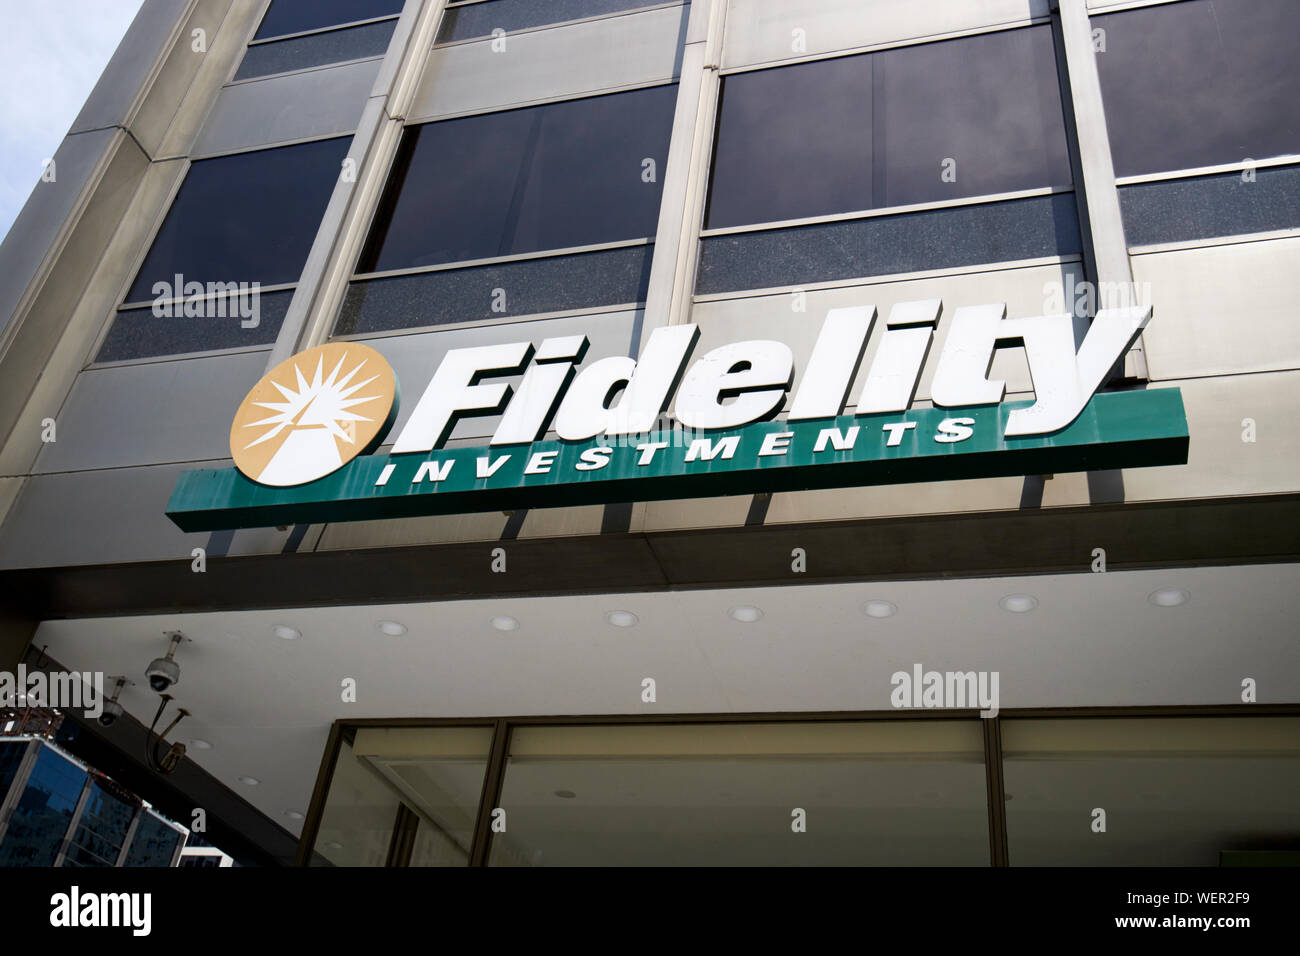 fidelity investments logo on building in chicago illinois united states of america Stock Photo